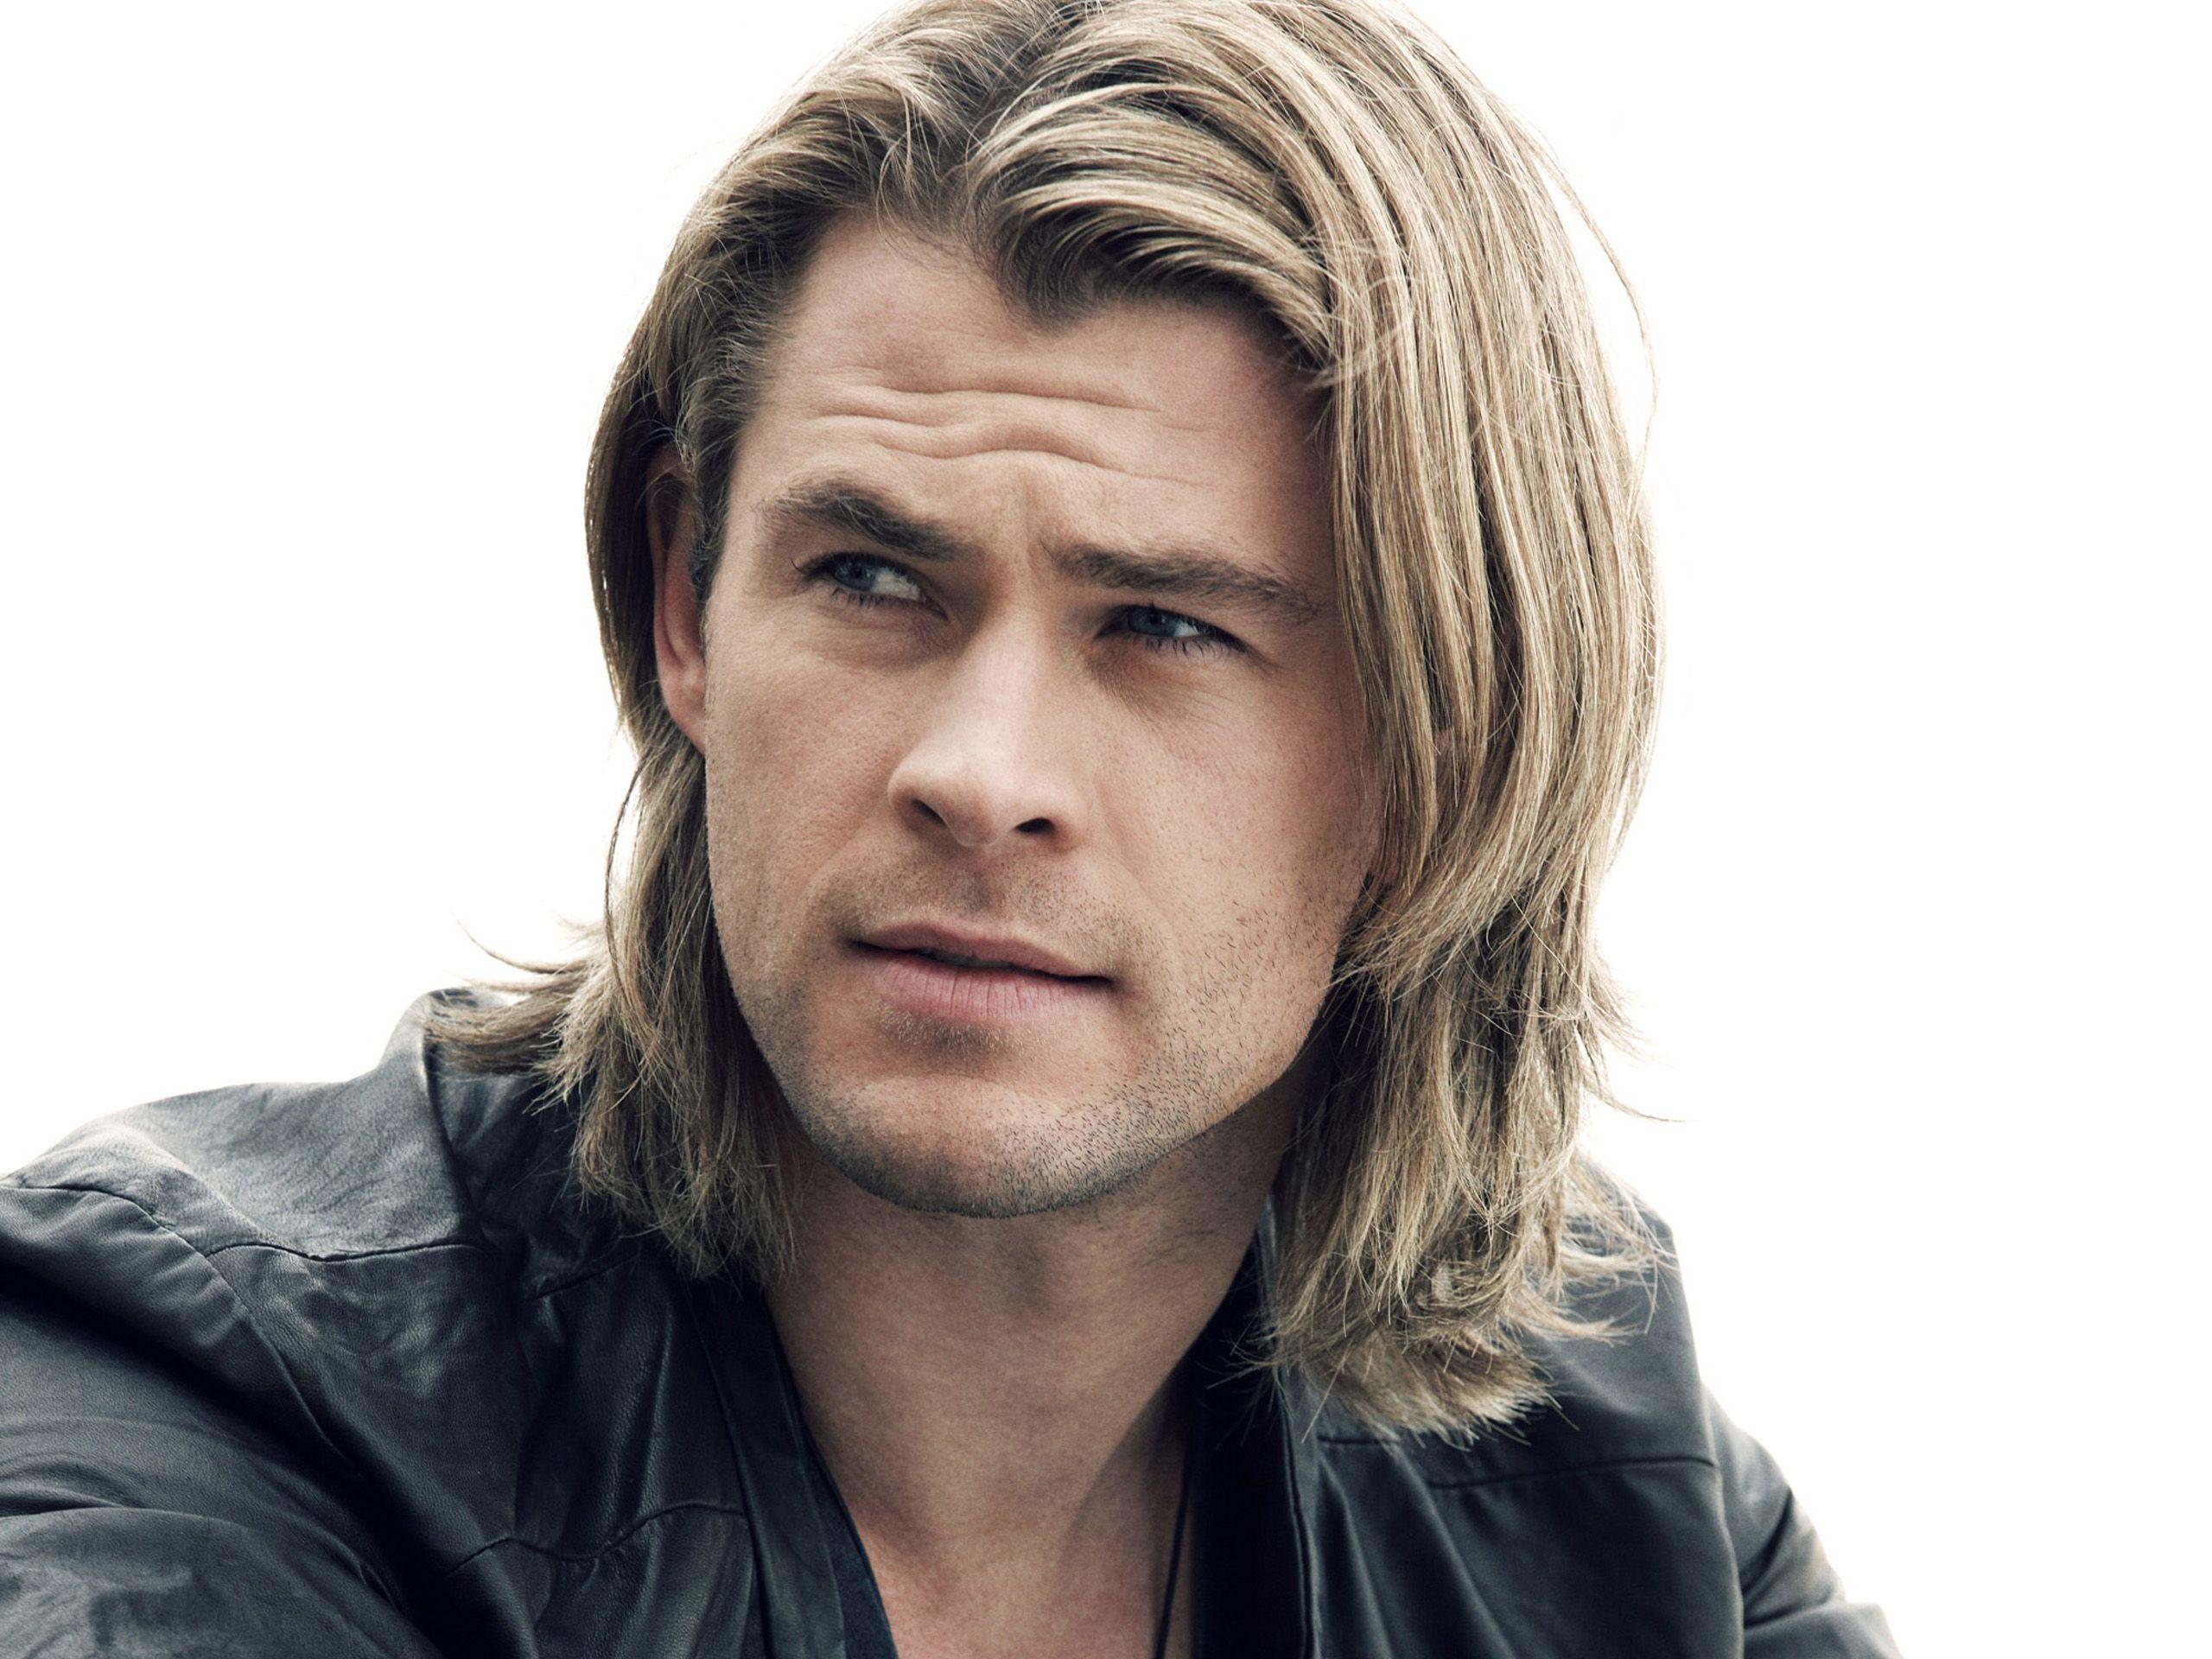 Chris Hemsworth Hollywood Actor Latest Image and Wallpaper